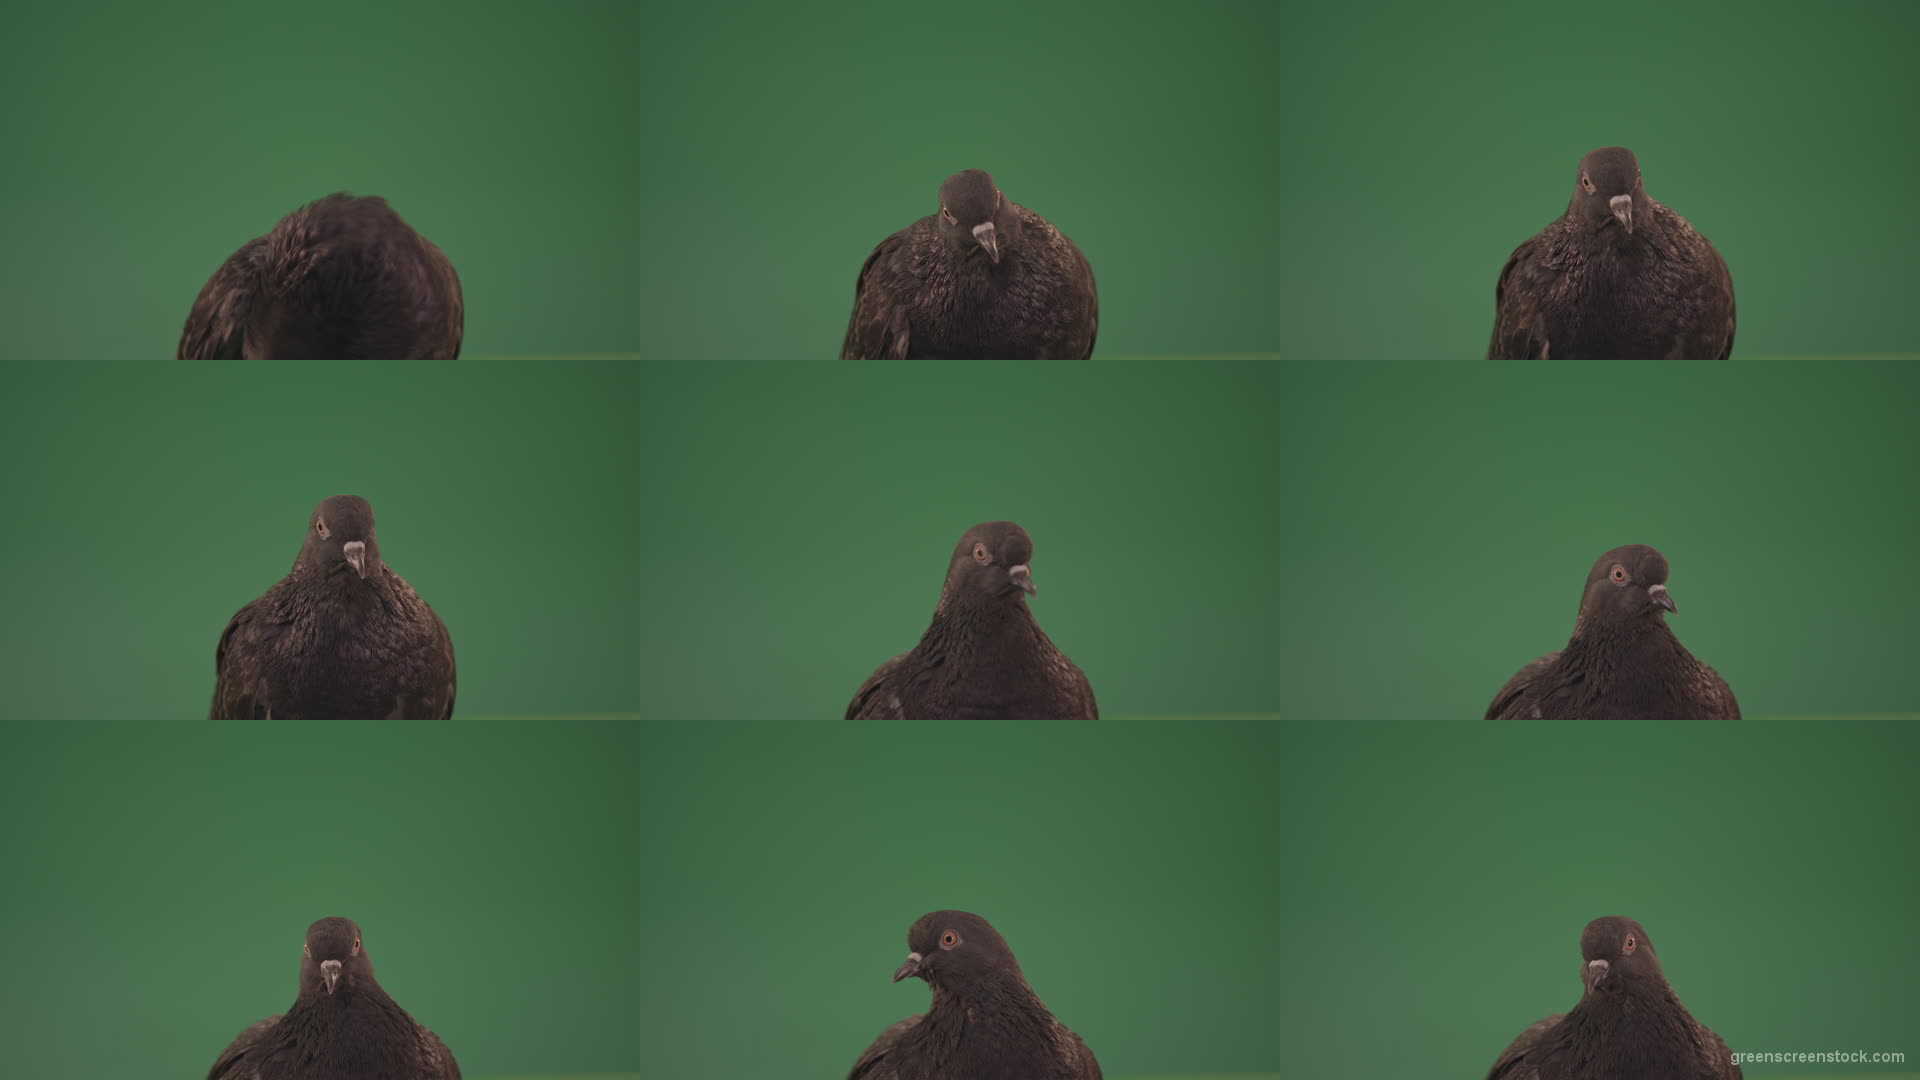 Pigeon-came-to-rest-after-a-long-flight-isolated-on-chromakey-background Green Screen Stock